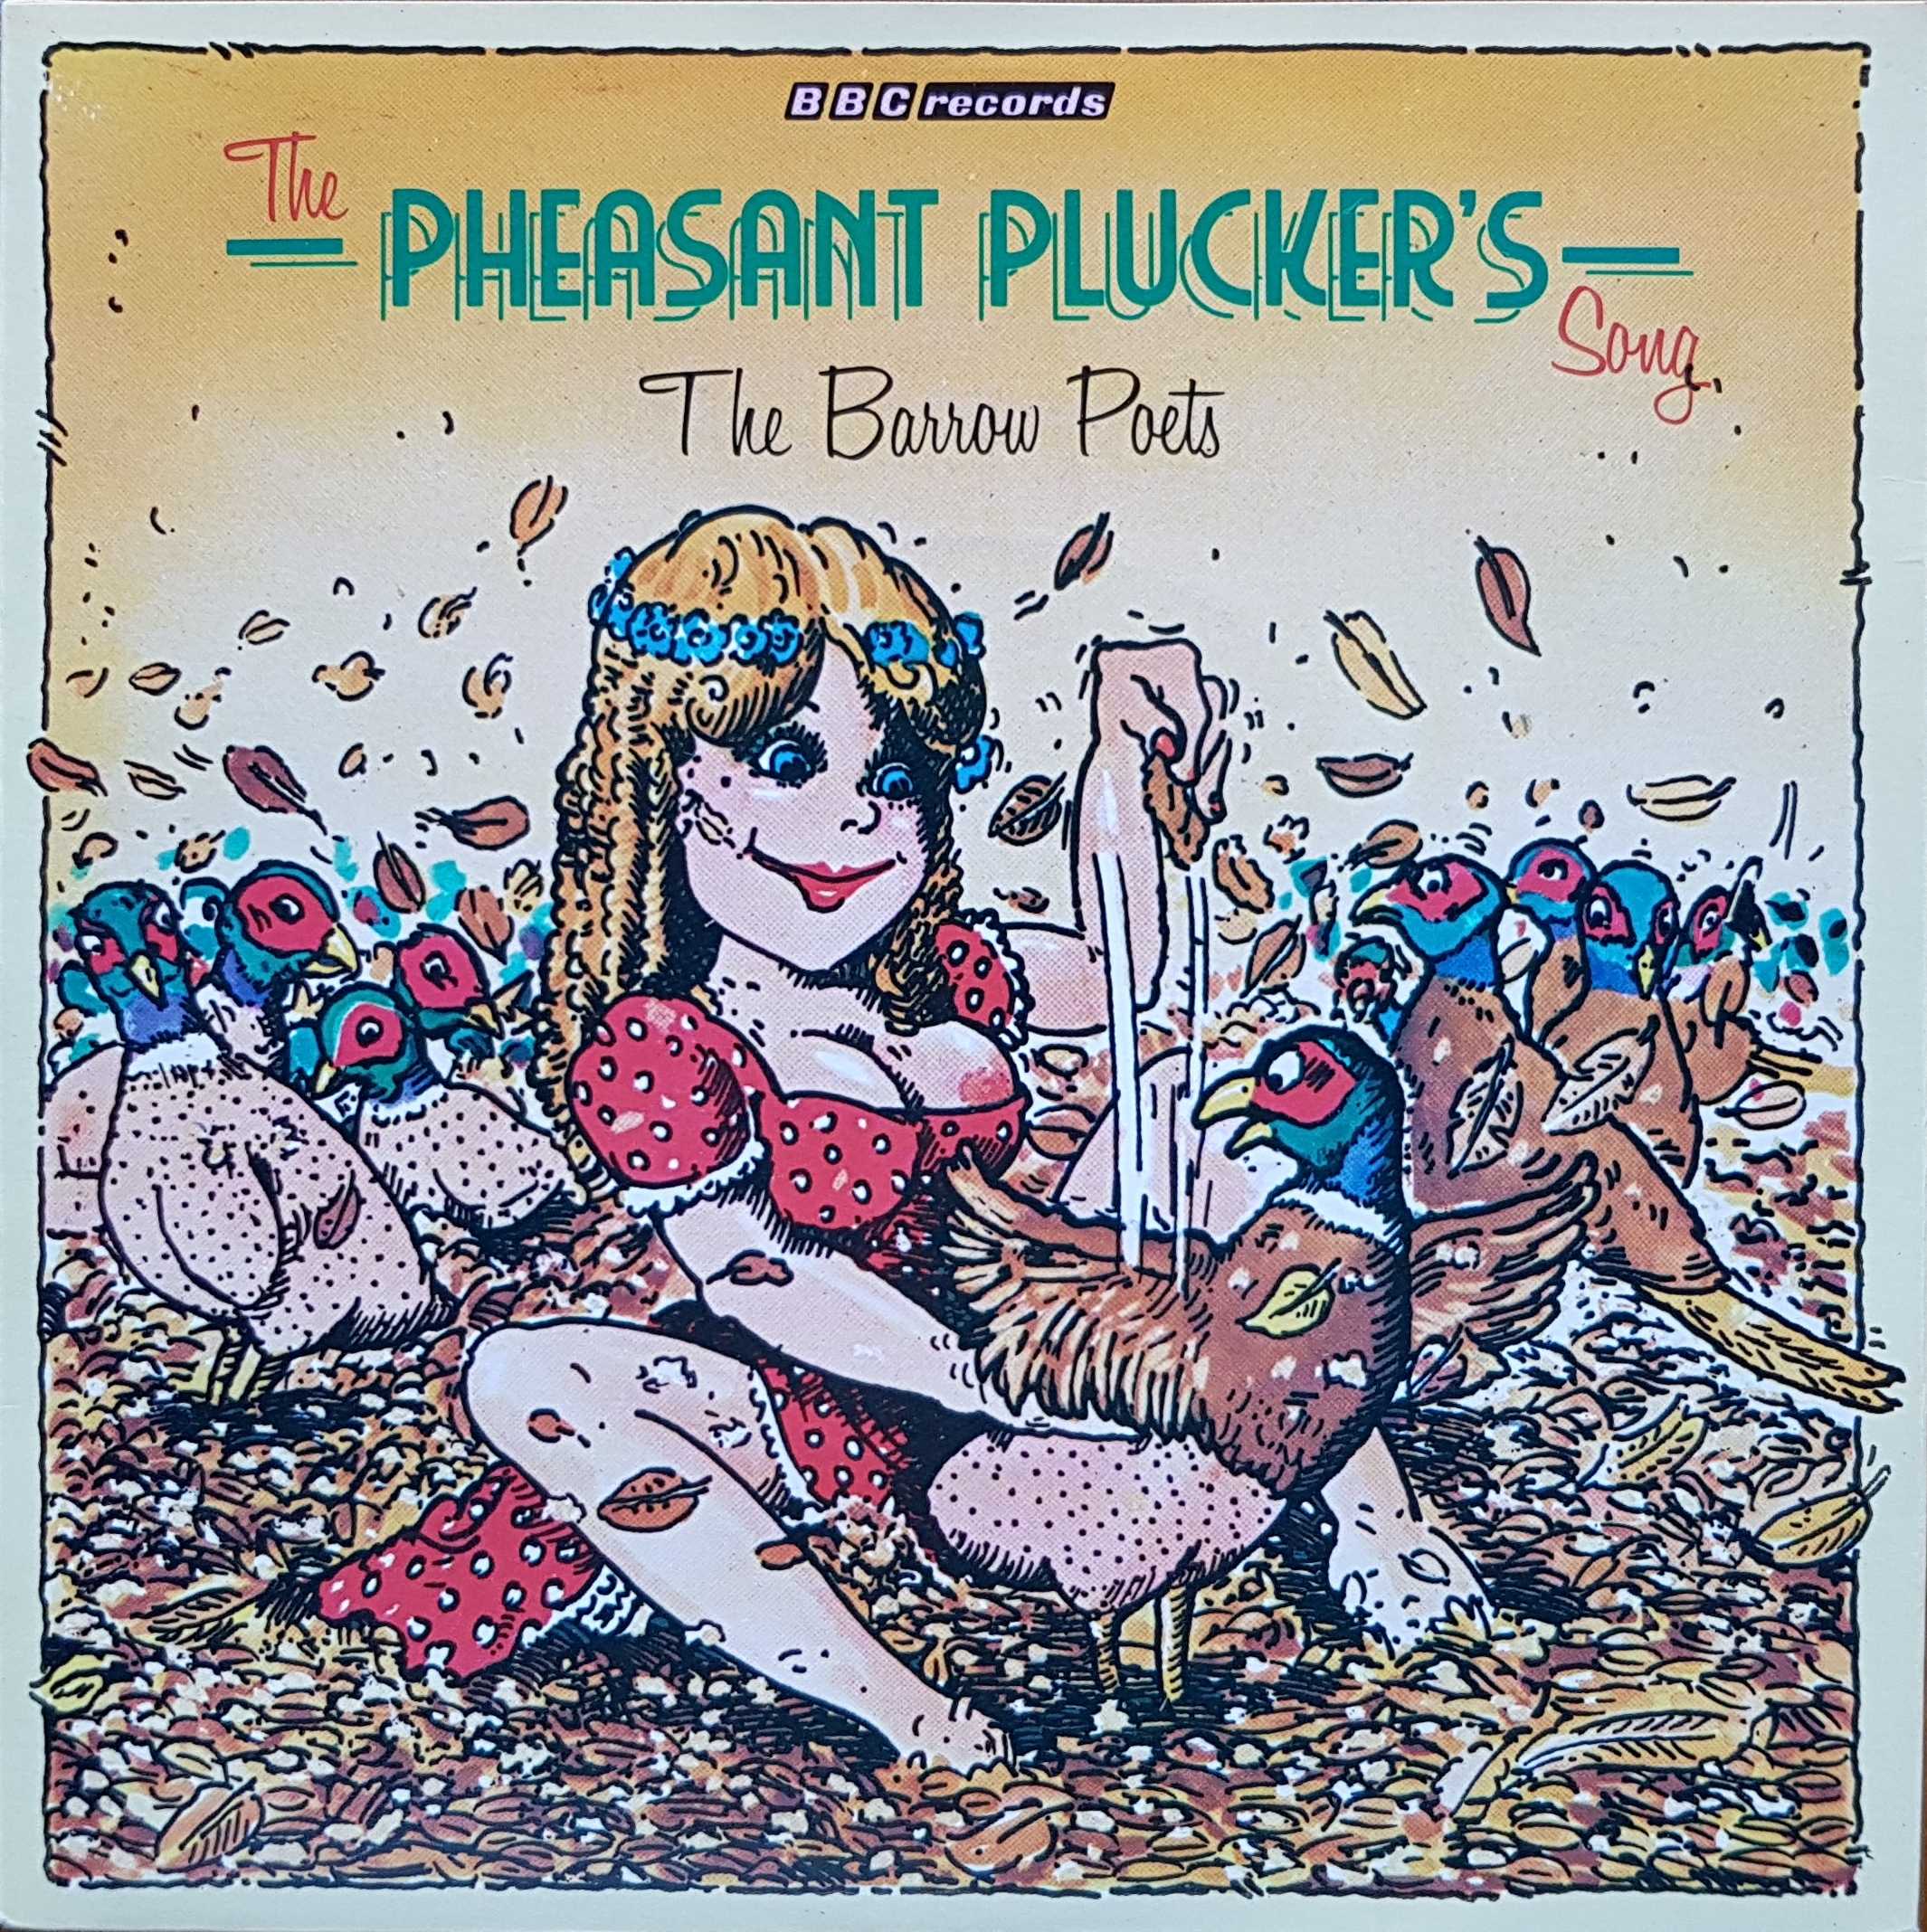 Picture of RESL 86 The pheasant plucker's song by artist The Barrow Poets from the BBC records and Tapes library